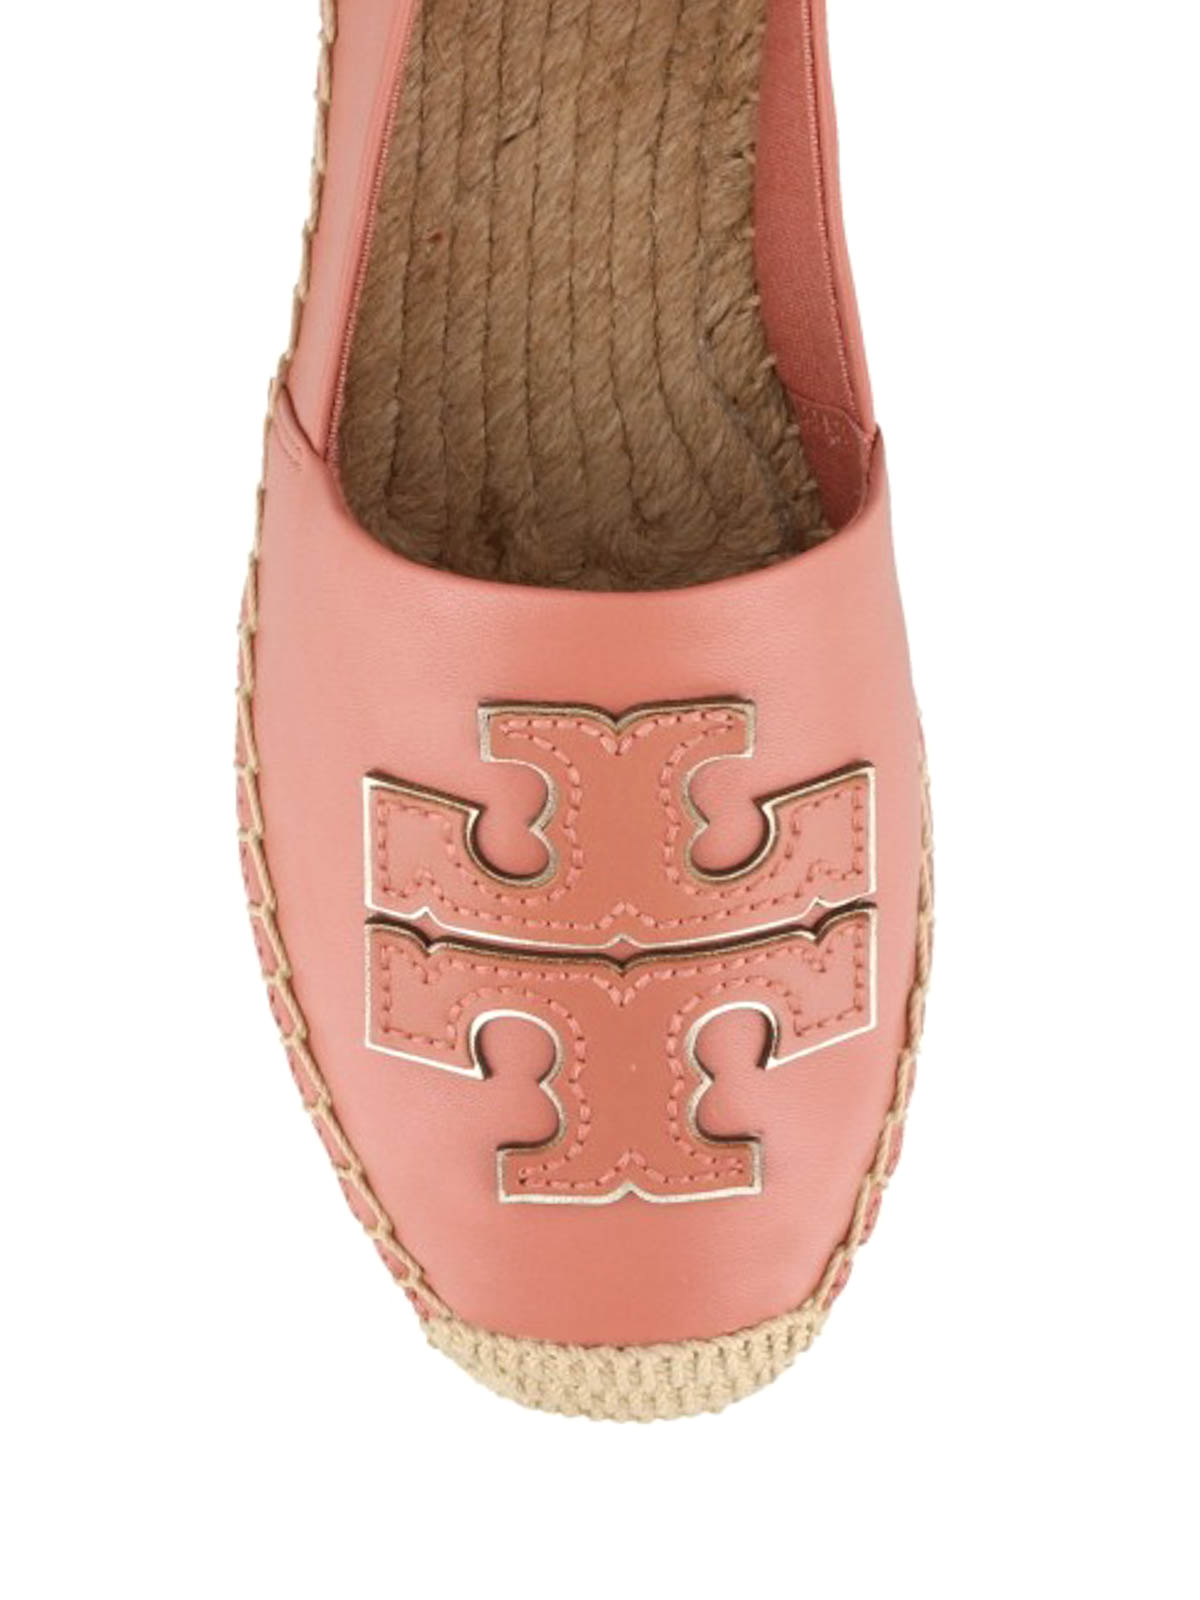 Espadrilles Tory Burch - Ines pink leather espadrilles - 52035202